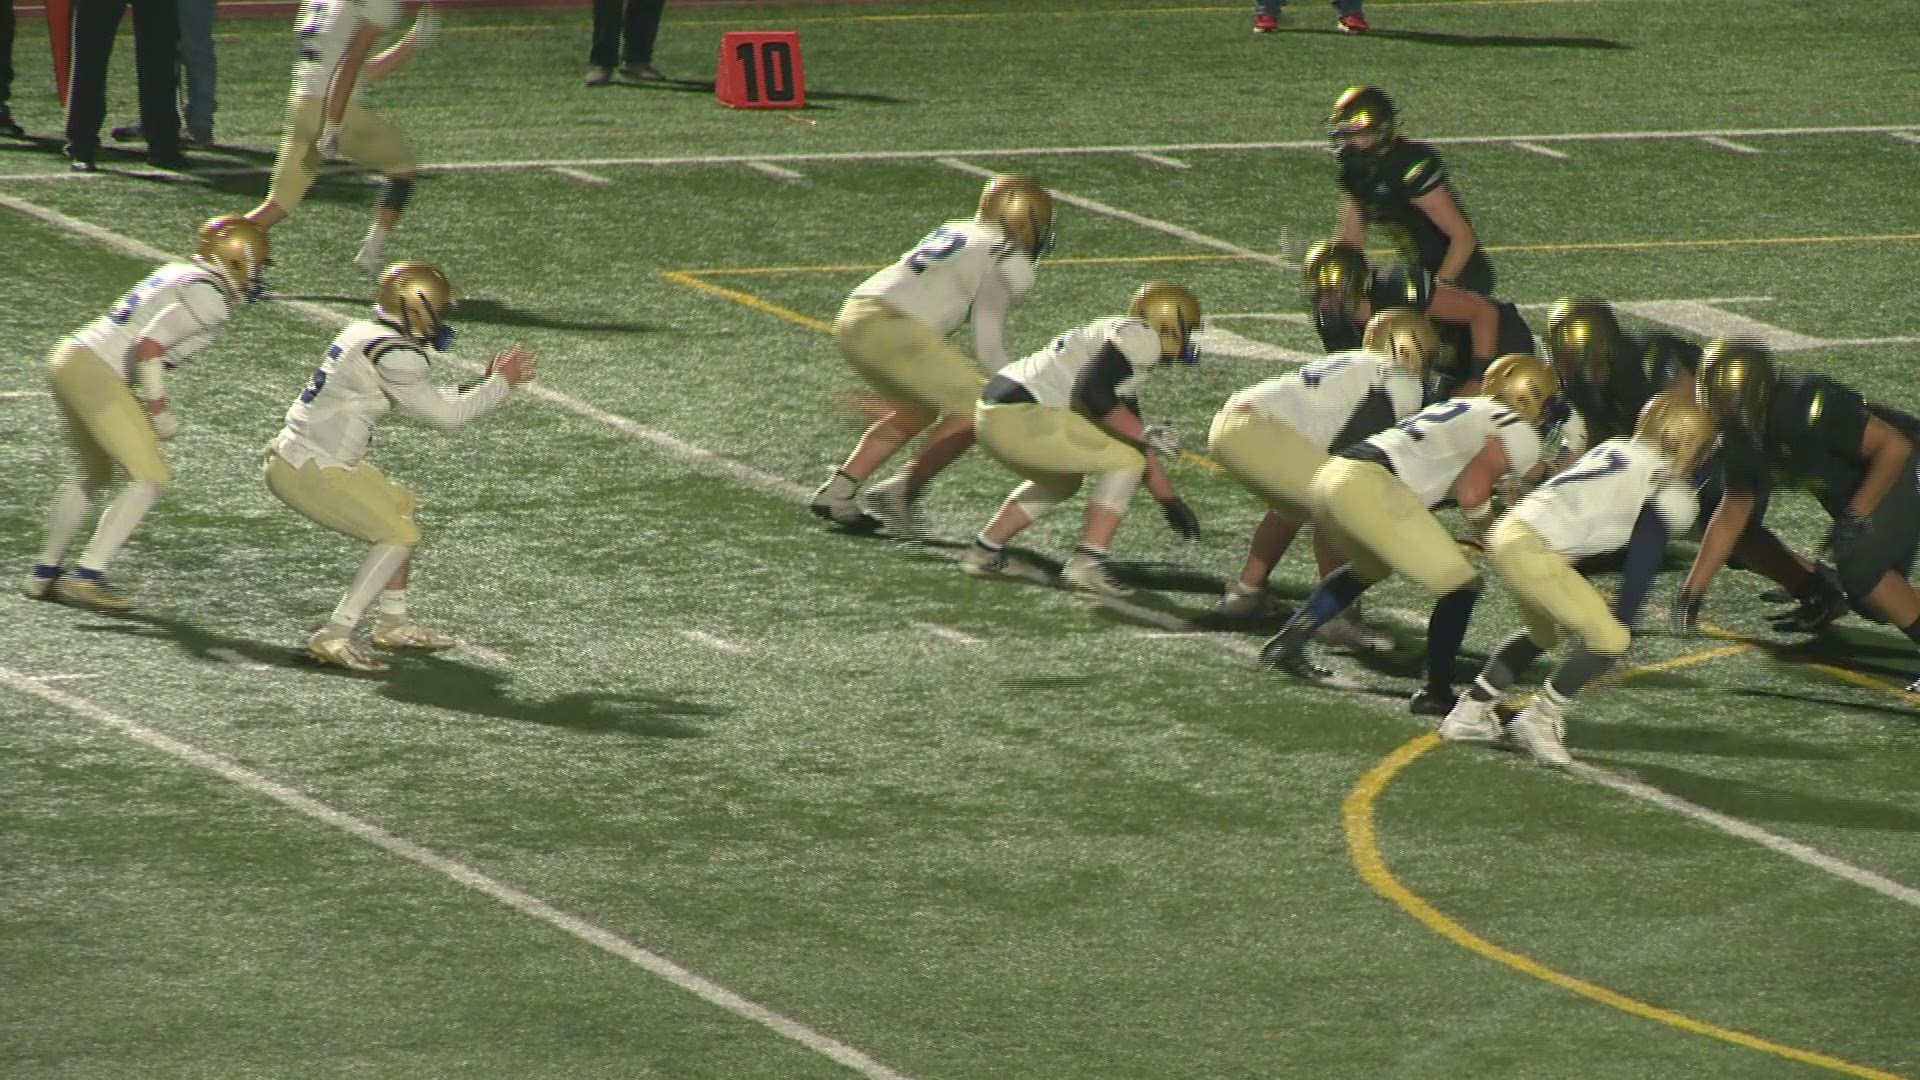 Highlights of Evergreen's 28-21 win over Kelso on April 2, 2021.